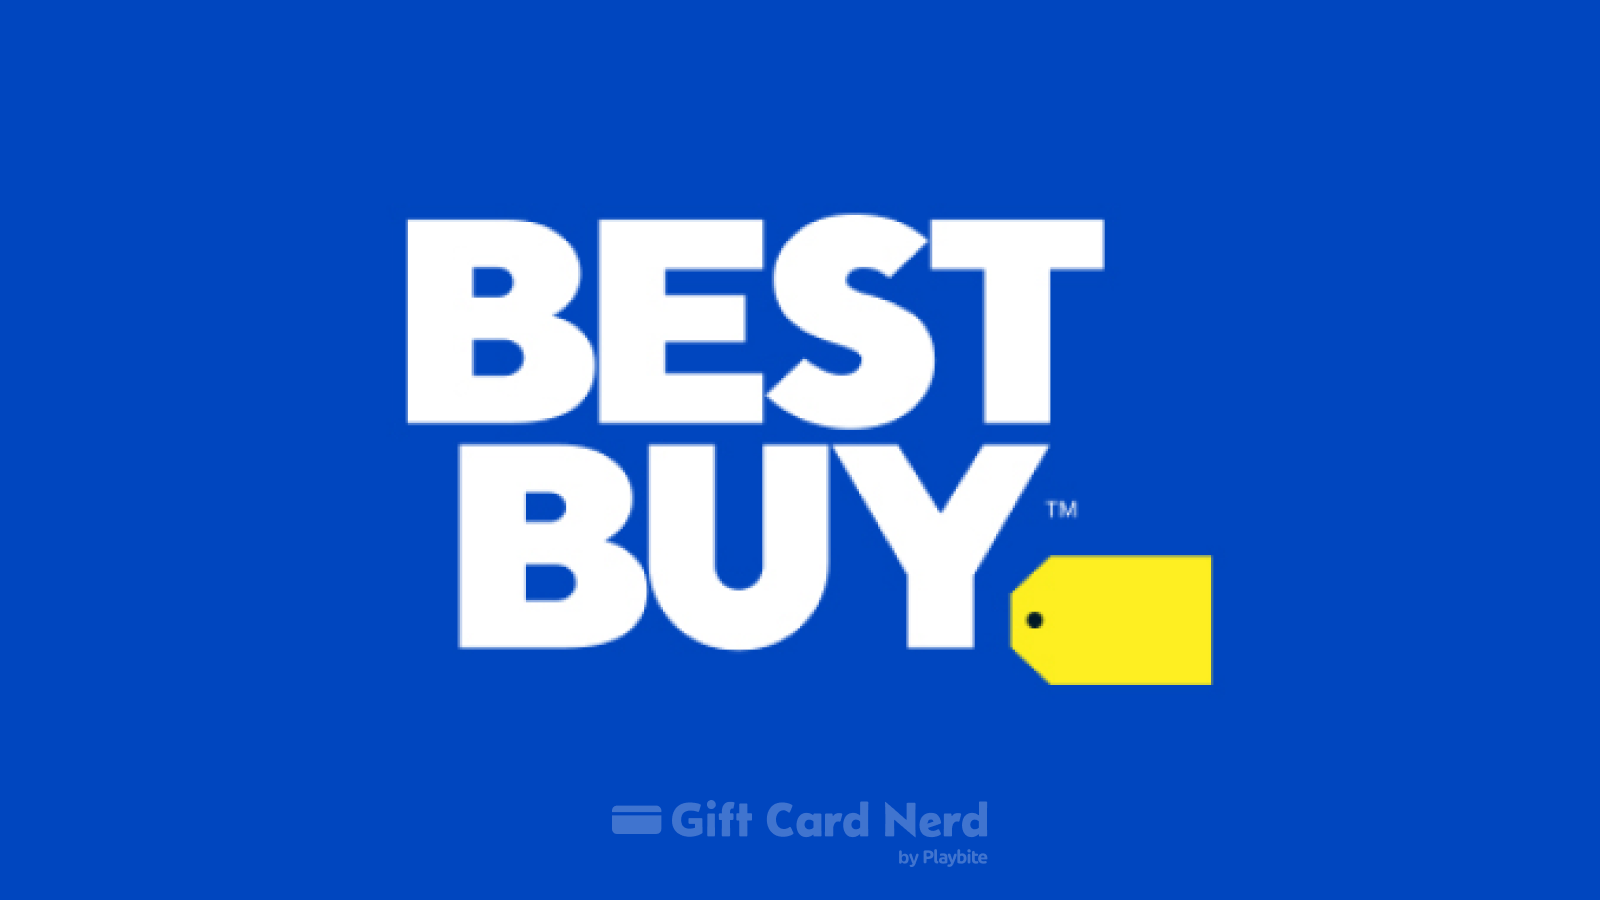 Can I Use a Best Buy Gift Card on Postmates?